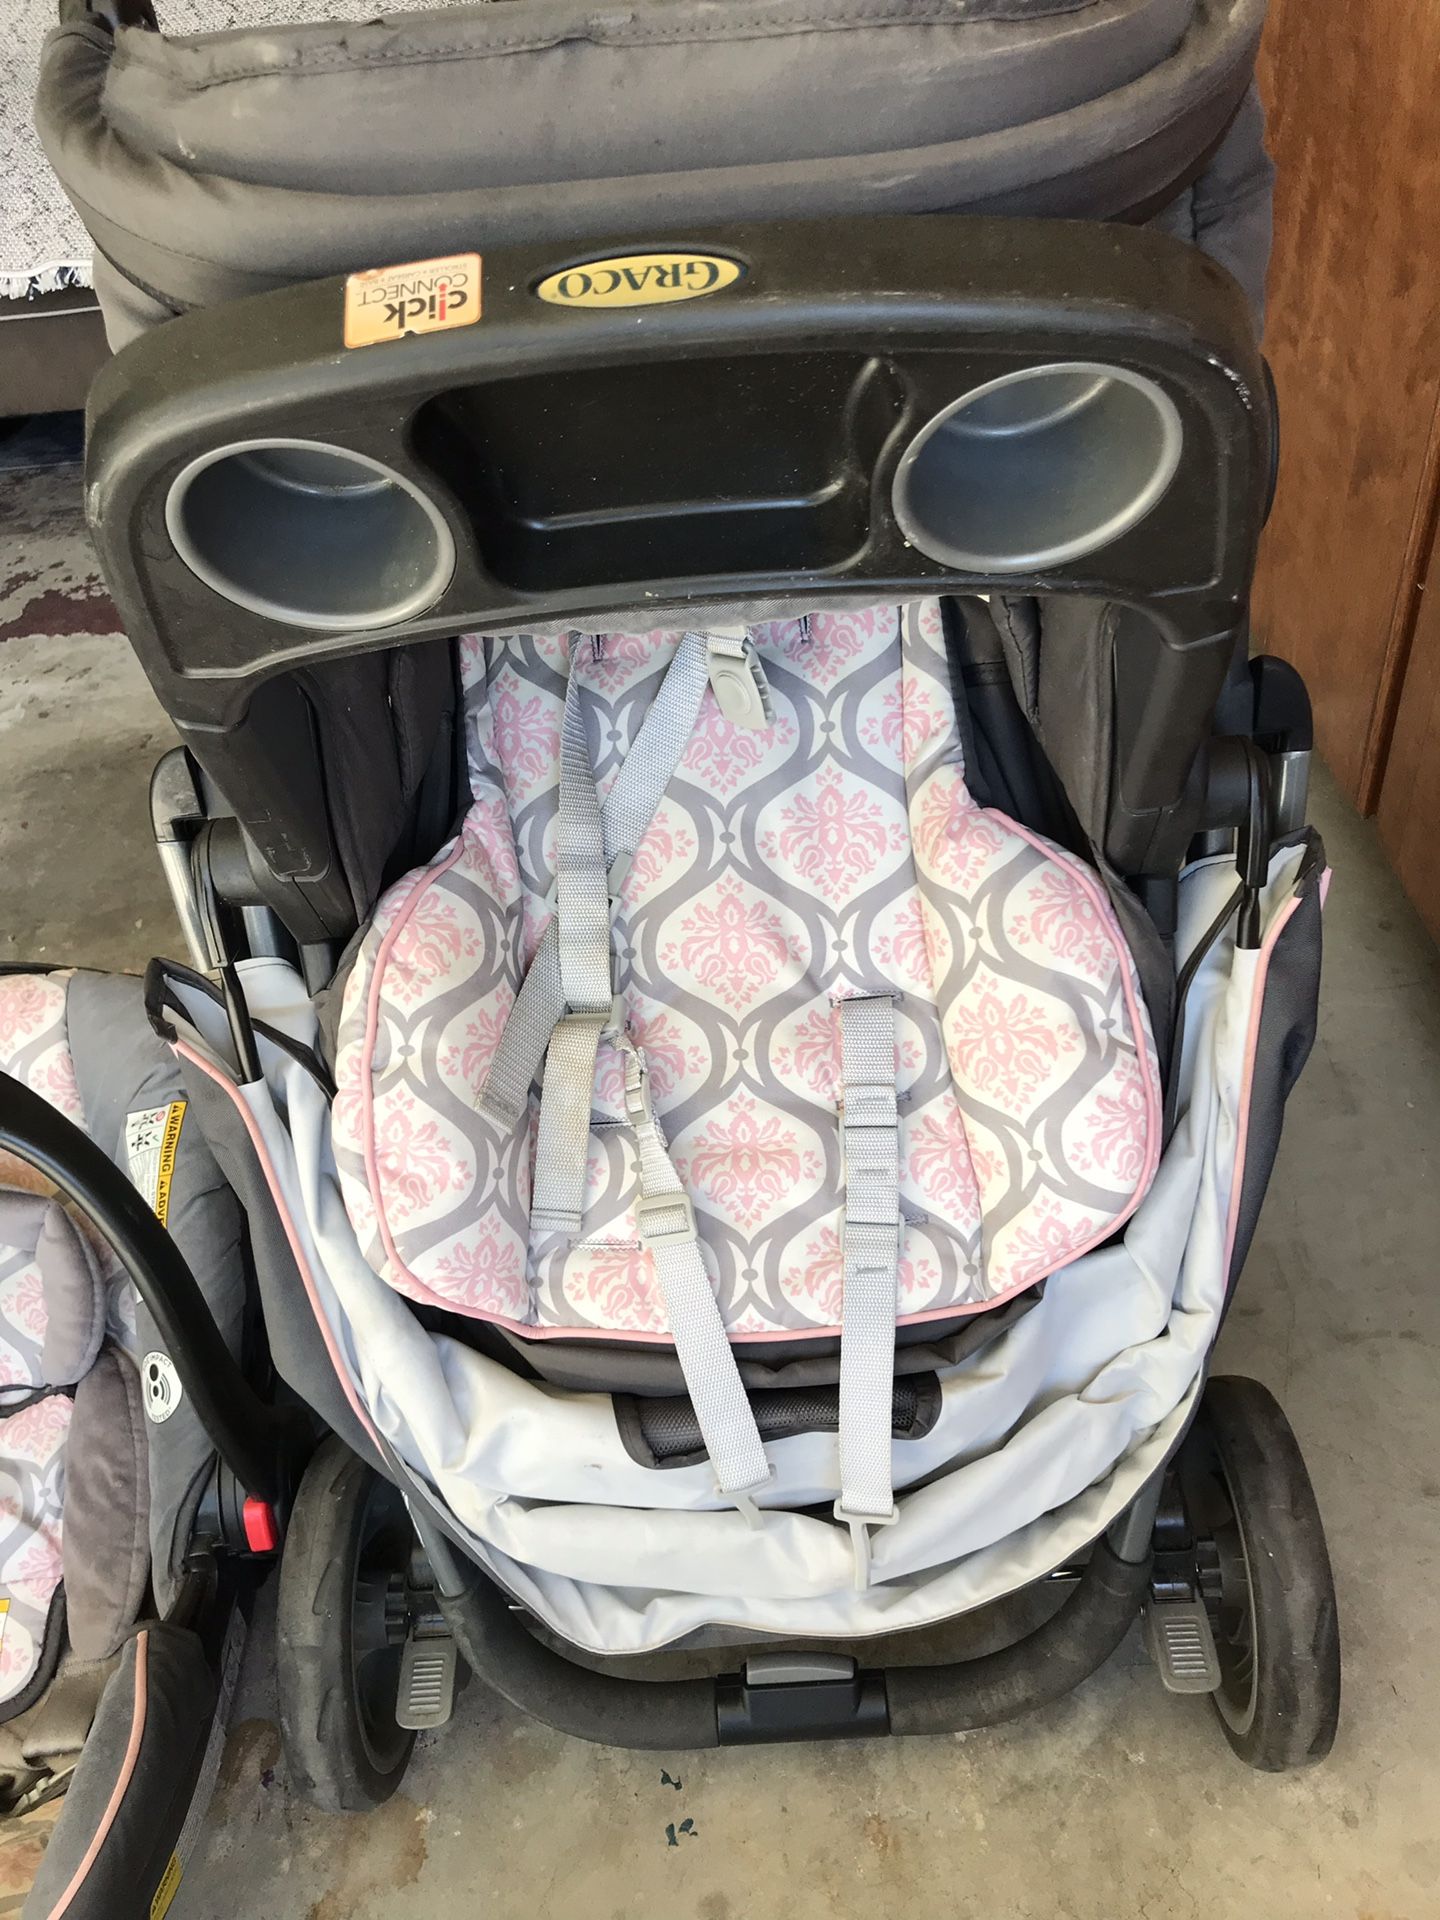 Graco stroller and infant seat